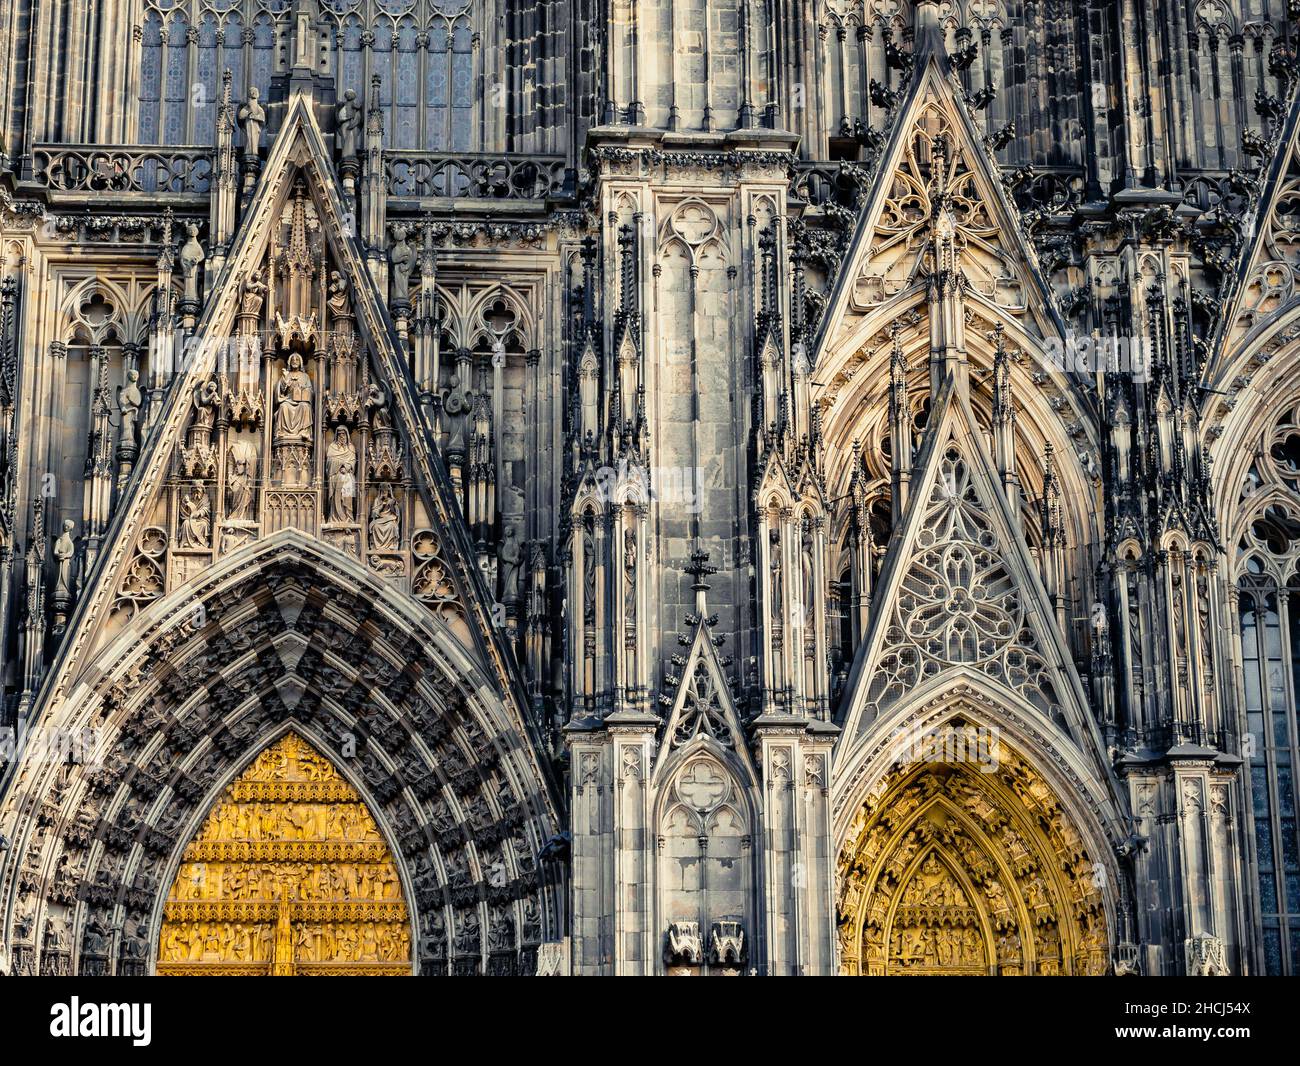 Details of the main doors of the cathedral of Cologne Stock Photo